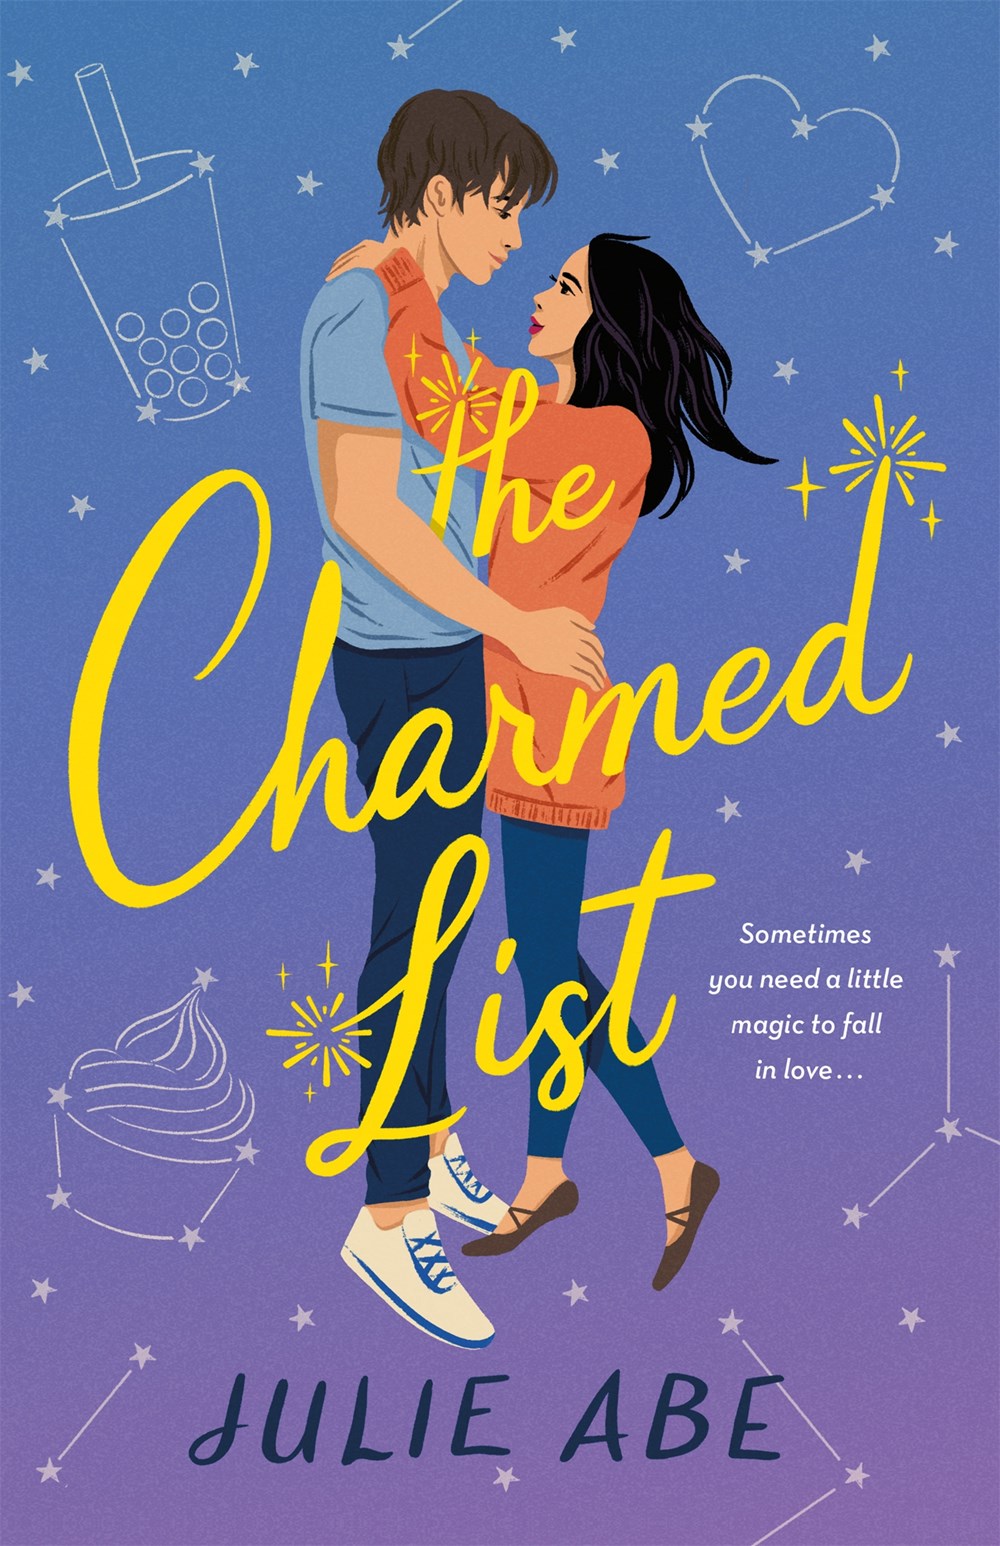 The charmed list cover